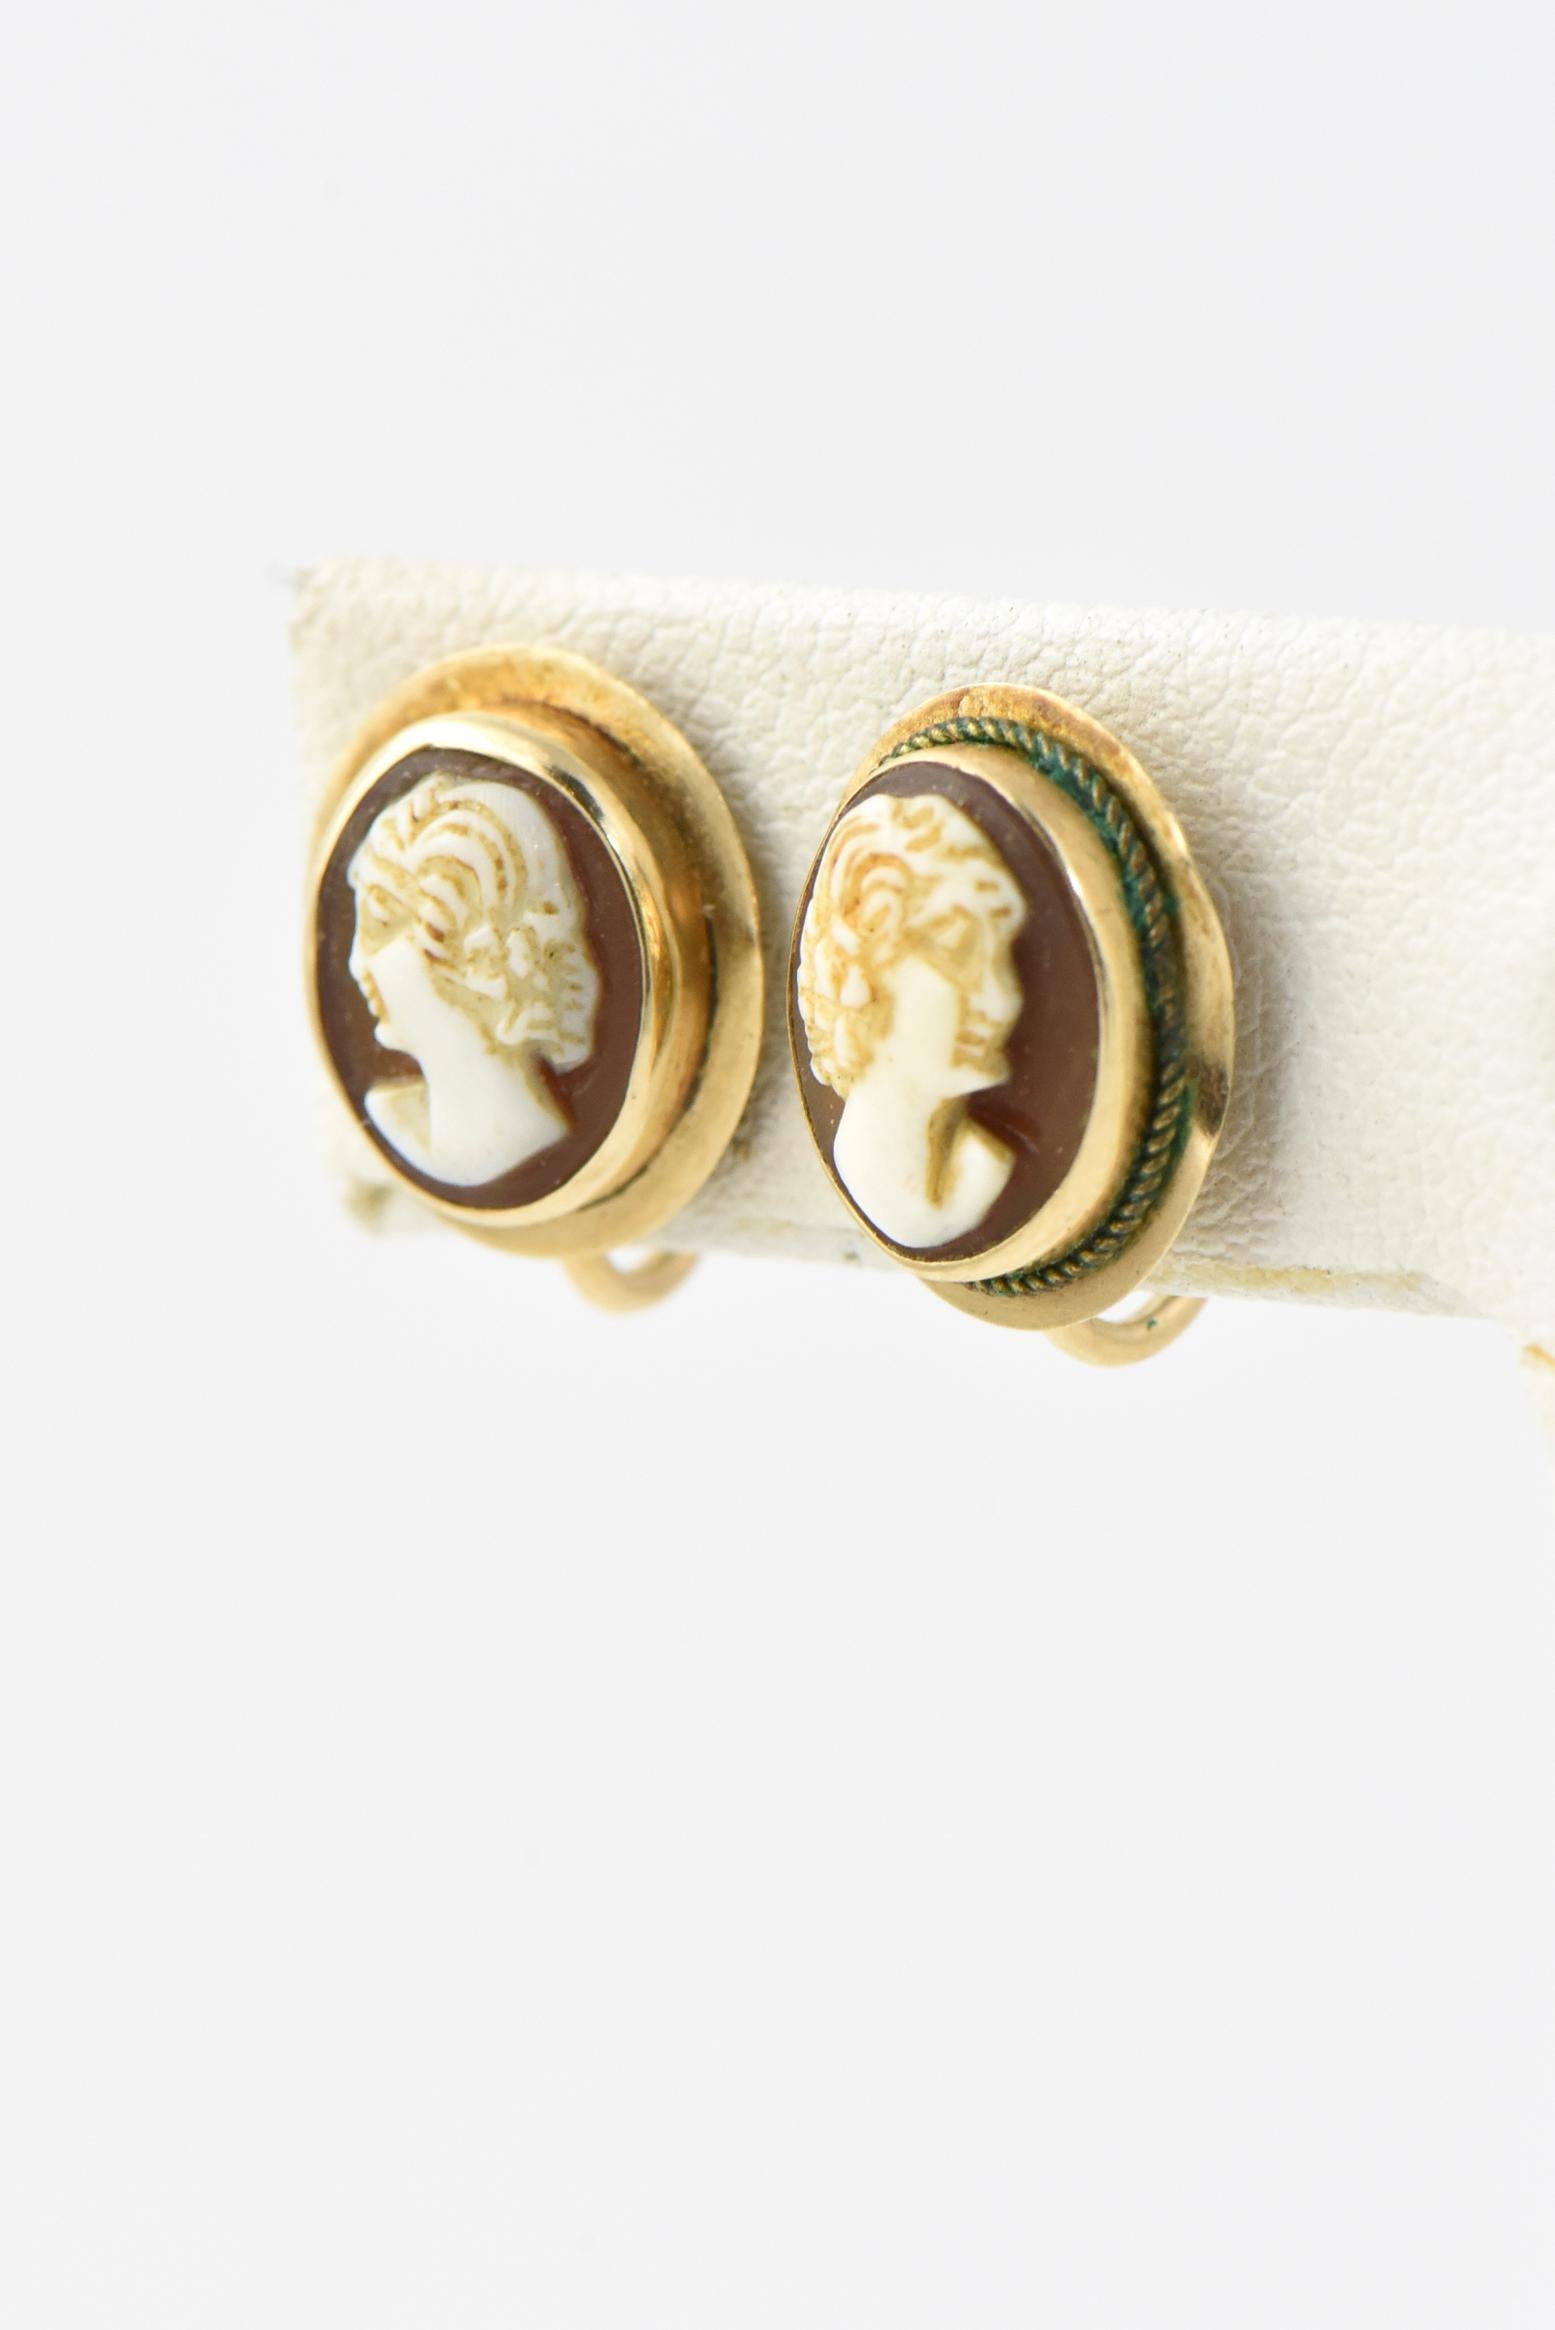 Small Victorian carved shell cameos featuring a portrait of a woman mounted in a raised gold bezel on a gold oval base. These earrings have a traditional Victorian screw back with no post. Marked: 14K. Age wear, tarnished, frame bent.